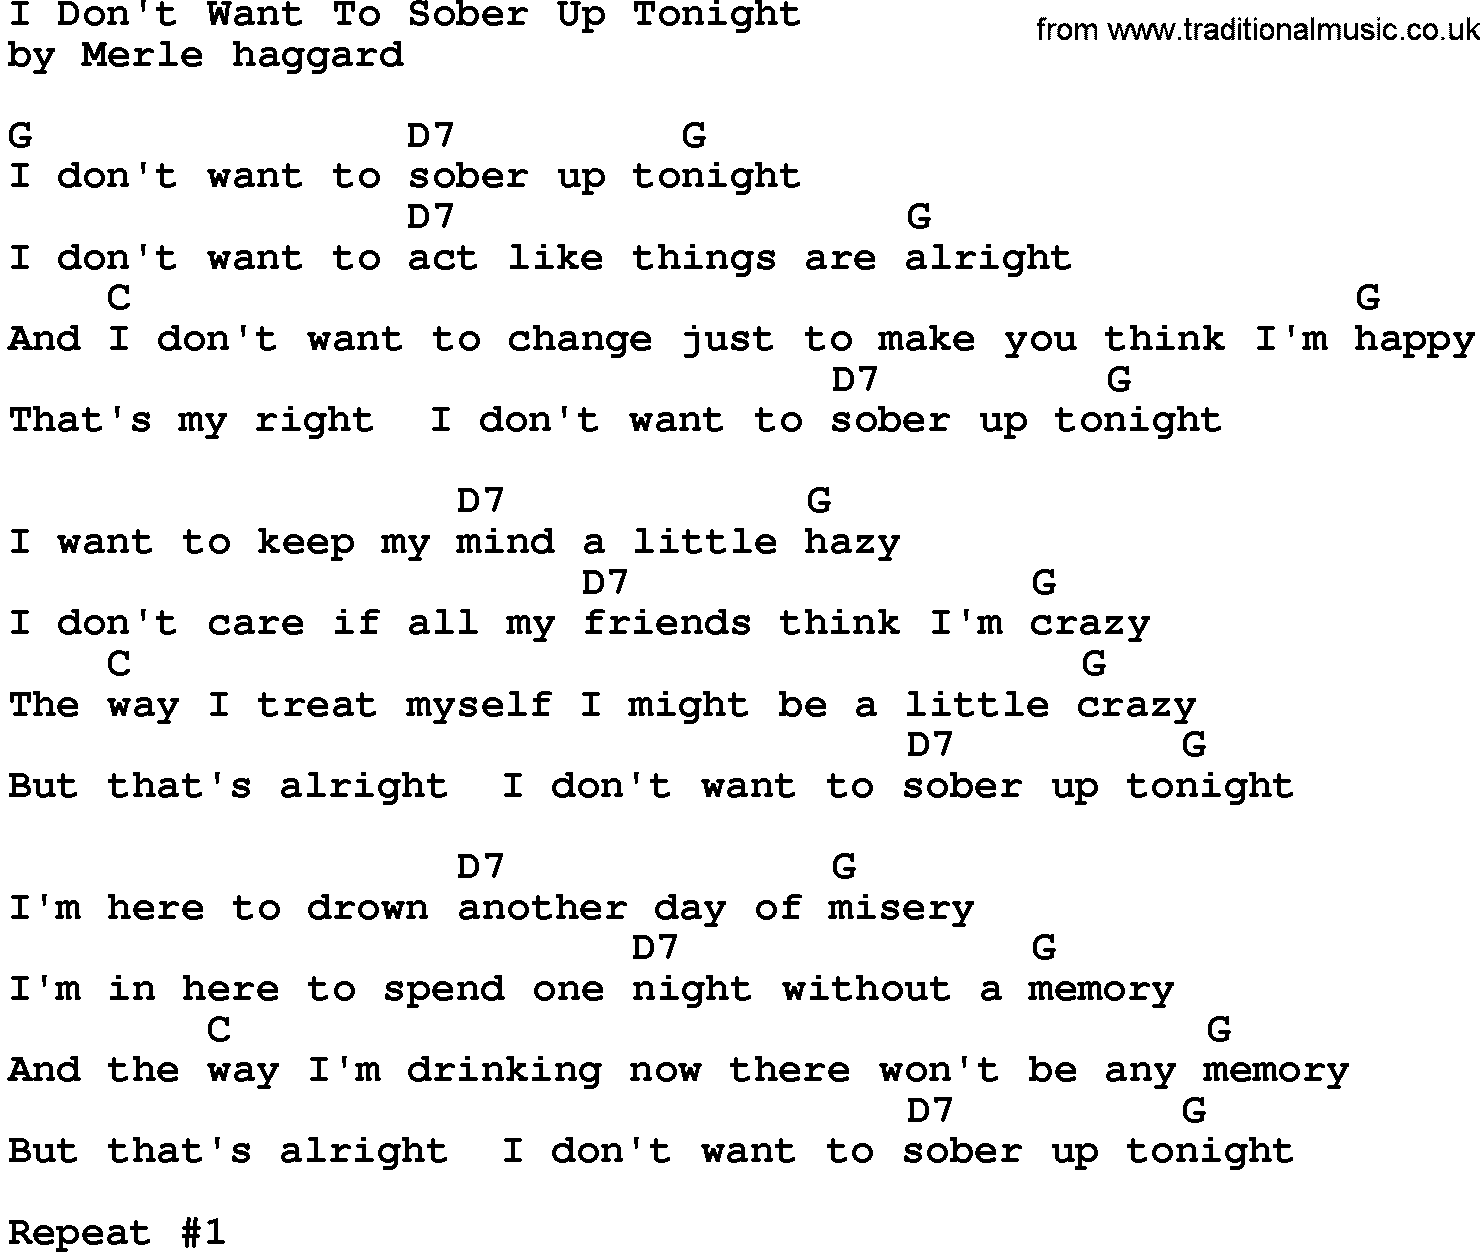 Country music song: I Don't Want To Sober Up Tonight lyrics and chords